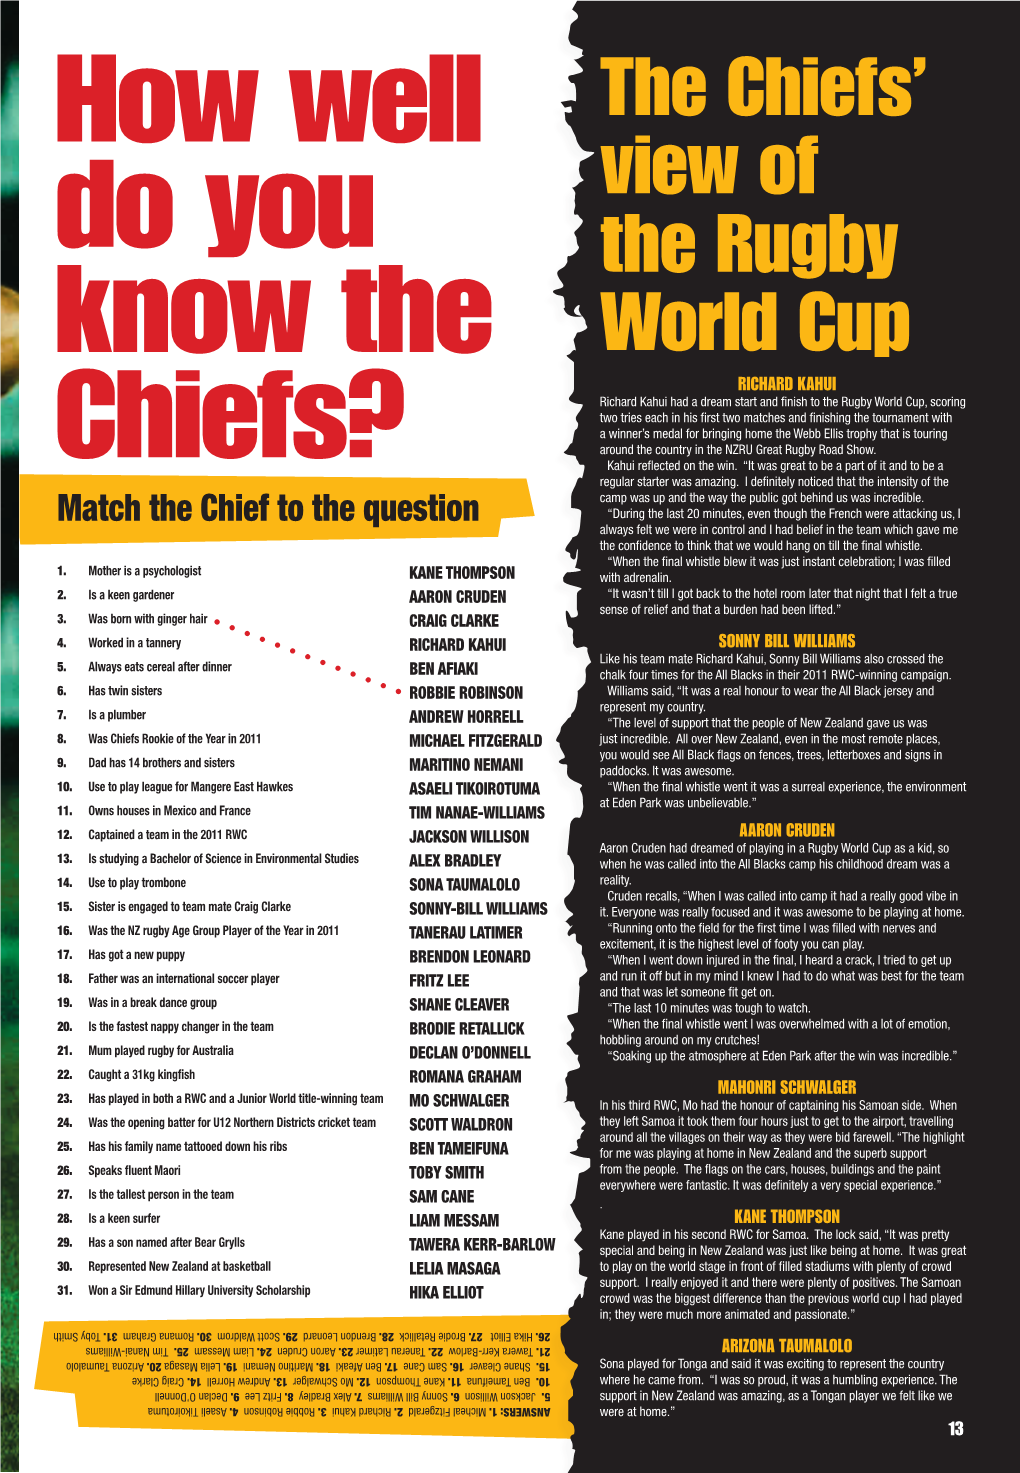 The Chiefs' View of the Rugby World